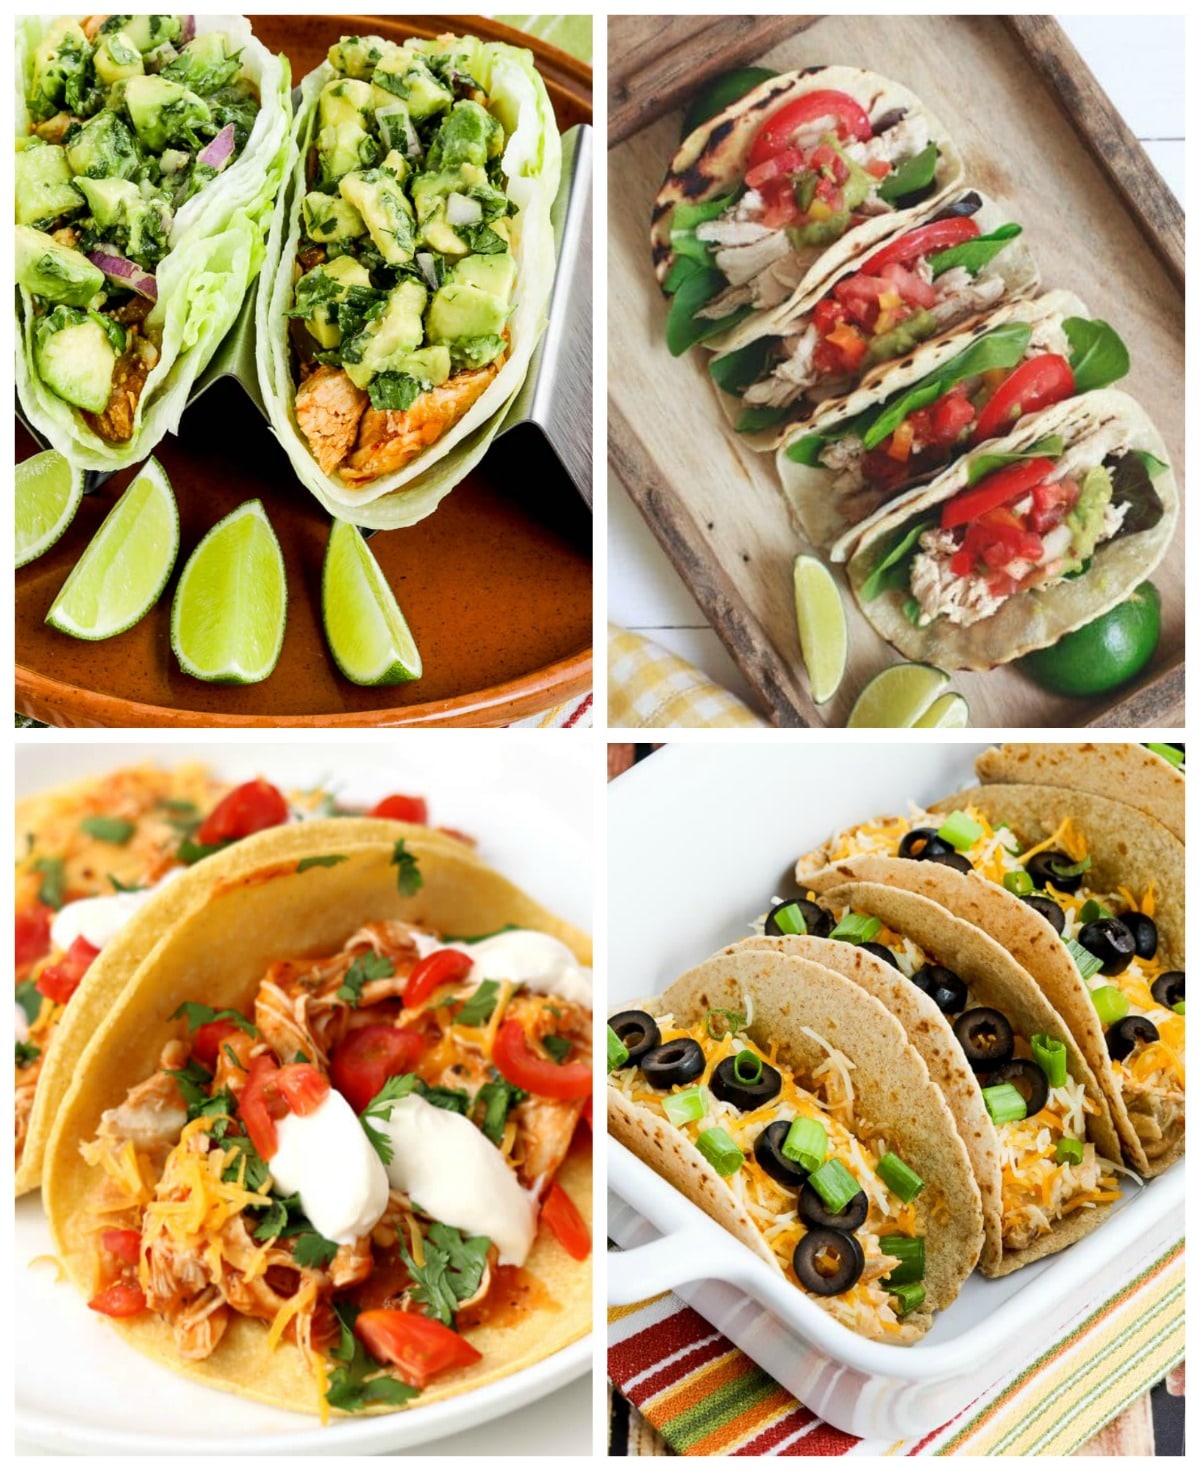 Four Fun Ideas for Chicken Tacos (Slow-Cooker or Instant Pot) found on Slow Cooker or Pressure Cooker